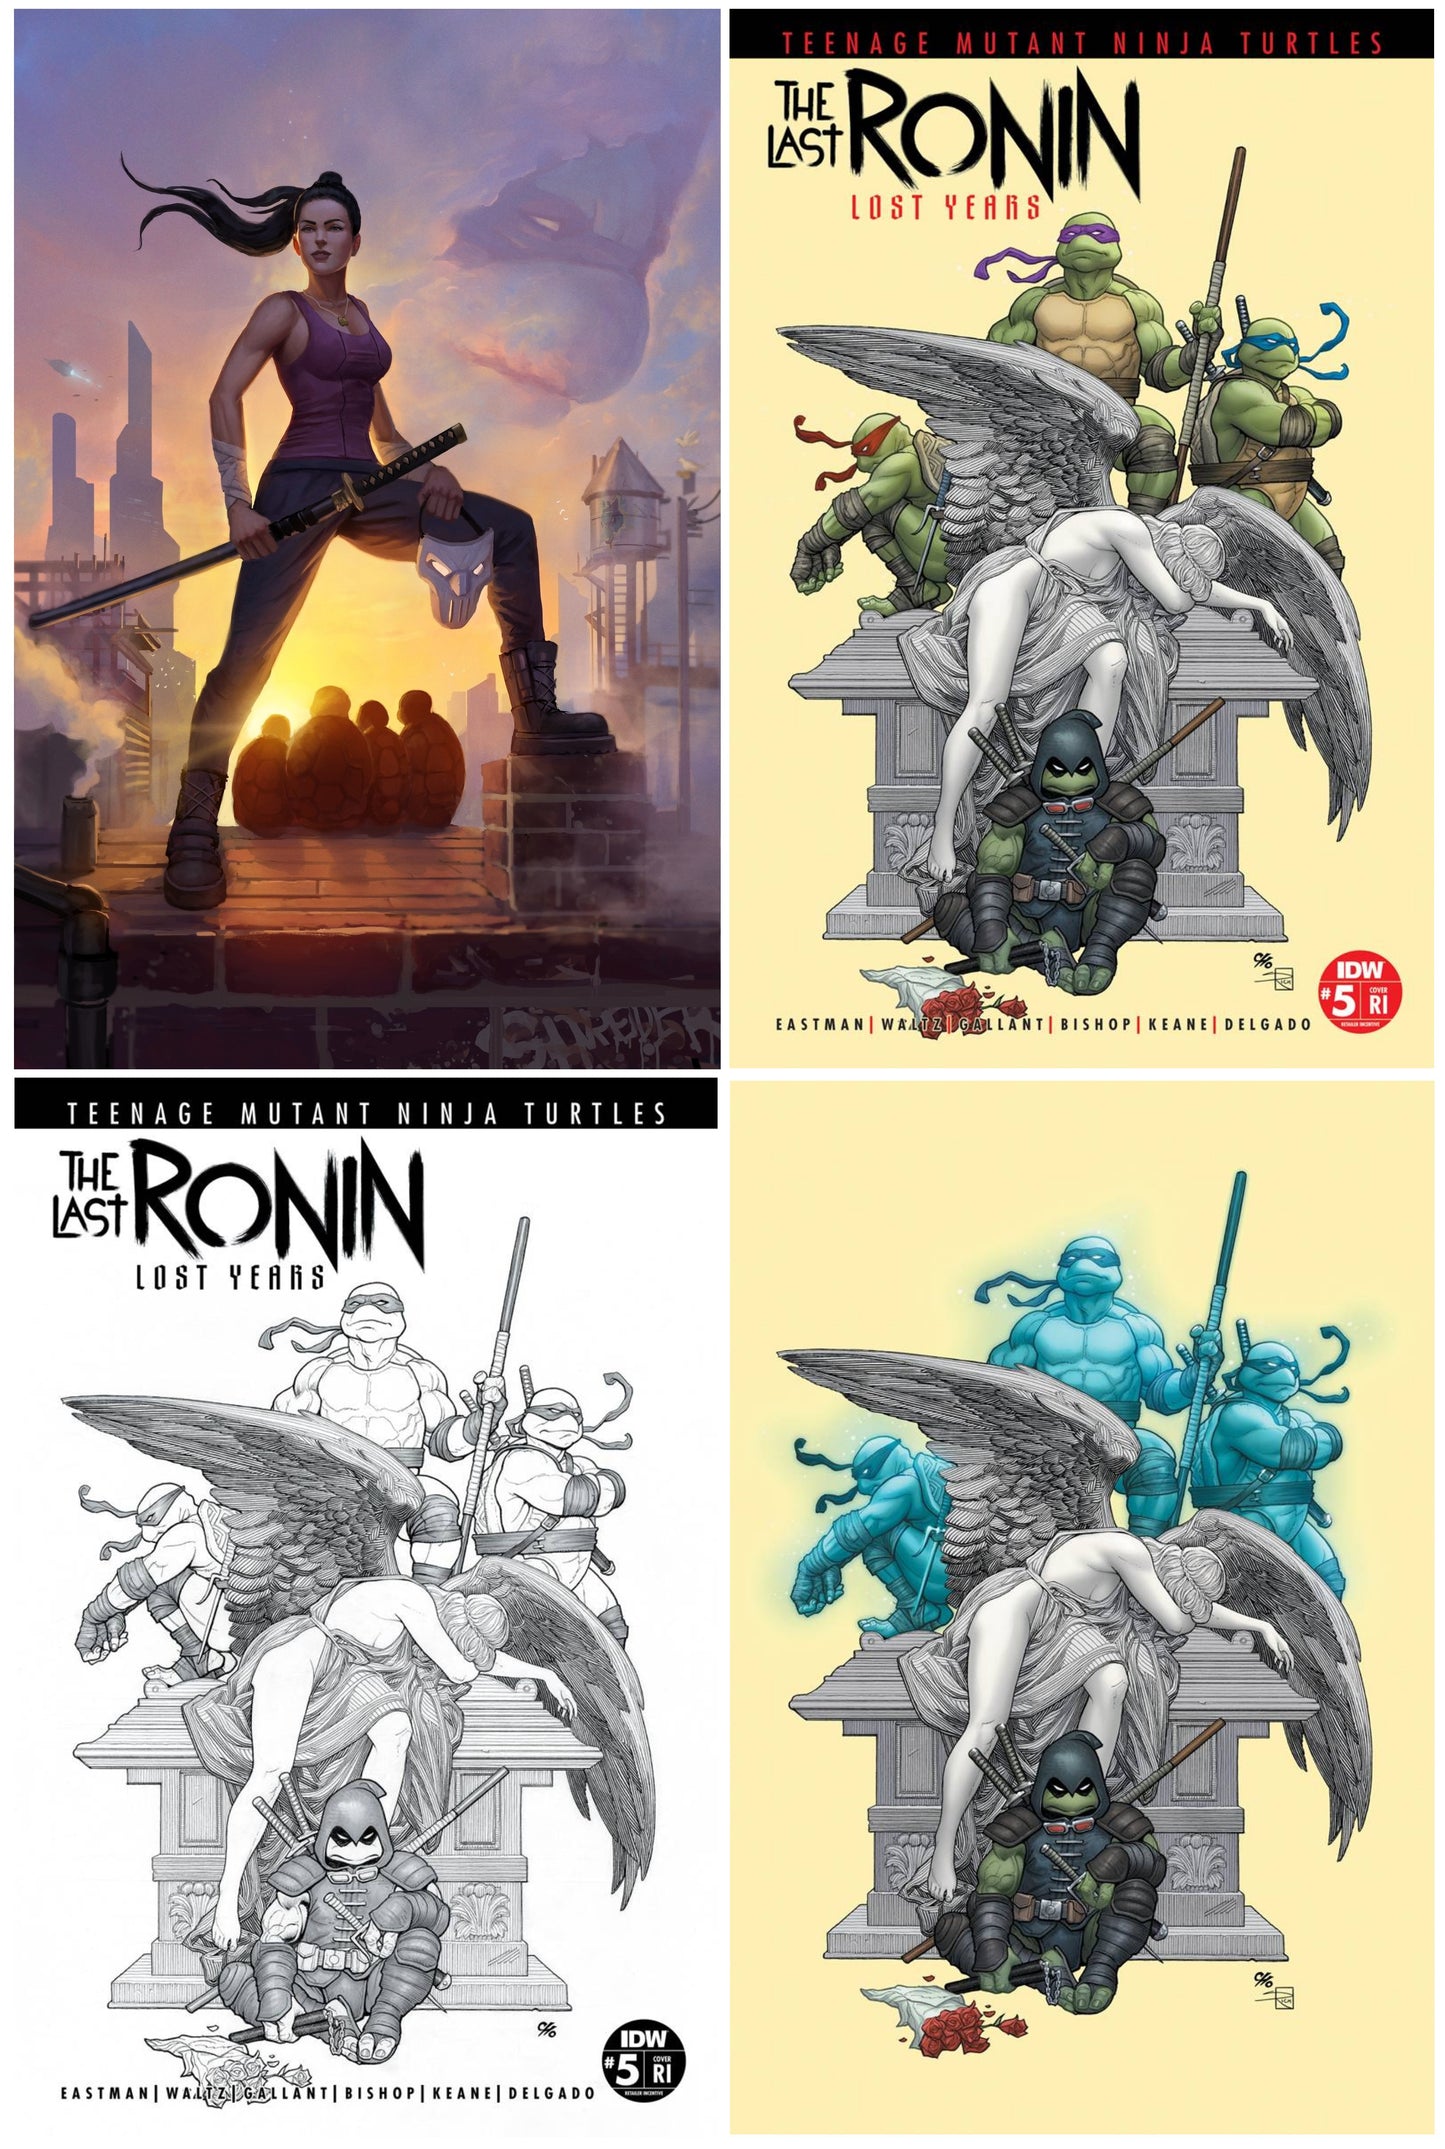 TMNT LAST RONIN LOST YEARS #5 AARON BARTLING VARIANT LIMITED TO 777 COPIES WITH NUMBERED COA + 1:25, 1:50 & 1:100 FRANK CHO VARAINTS